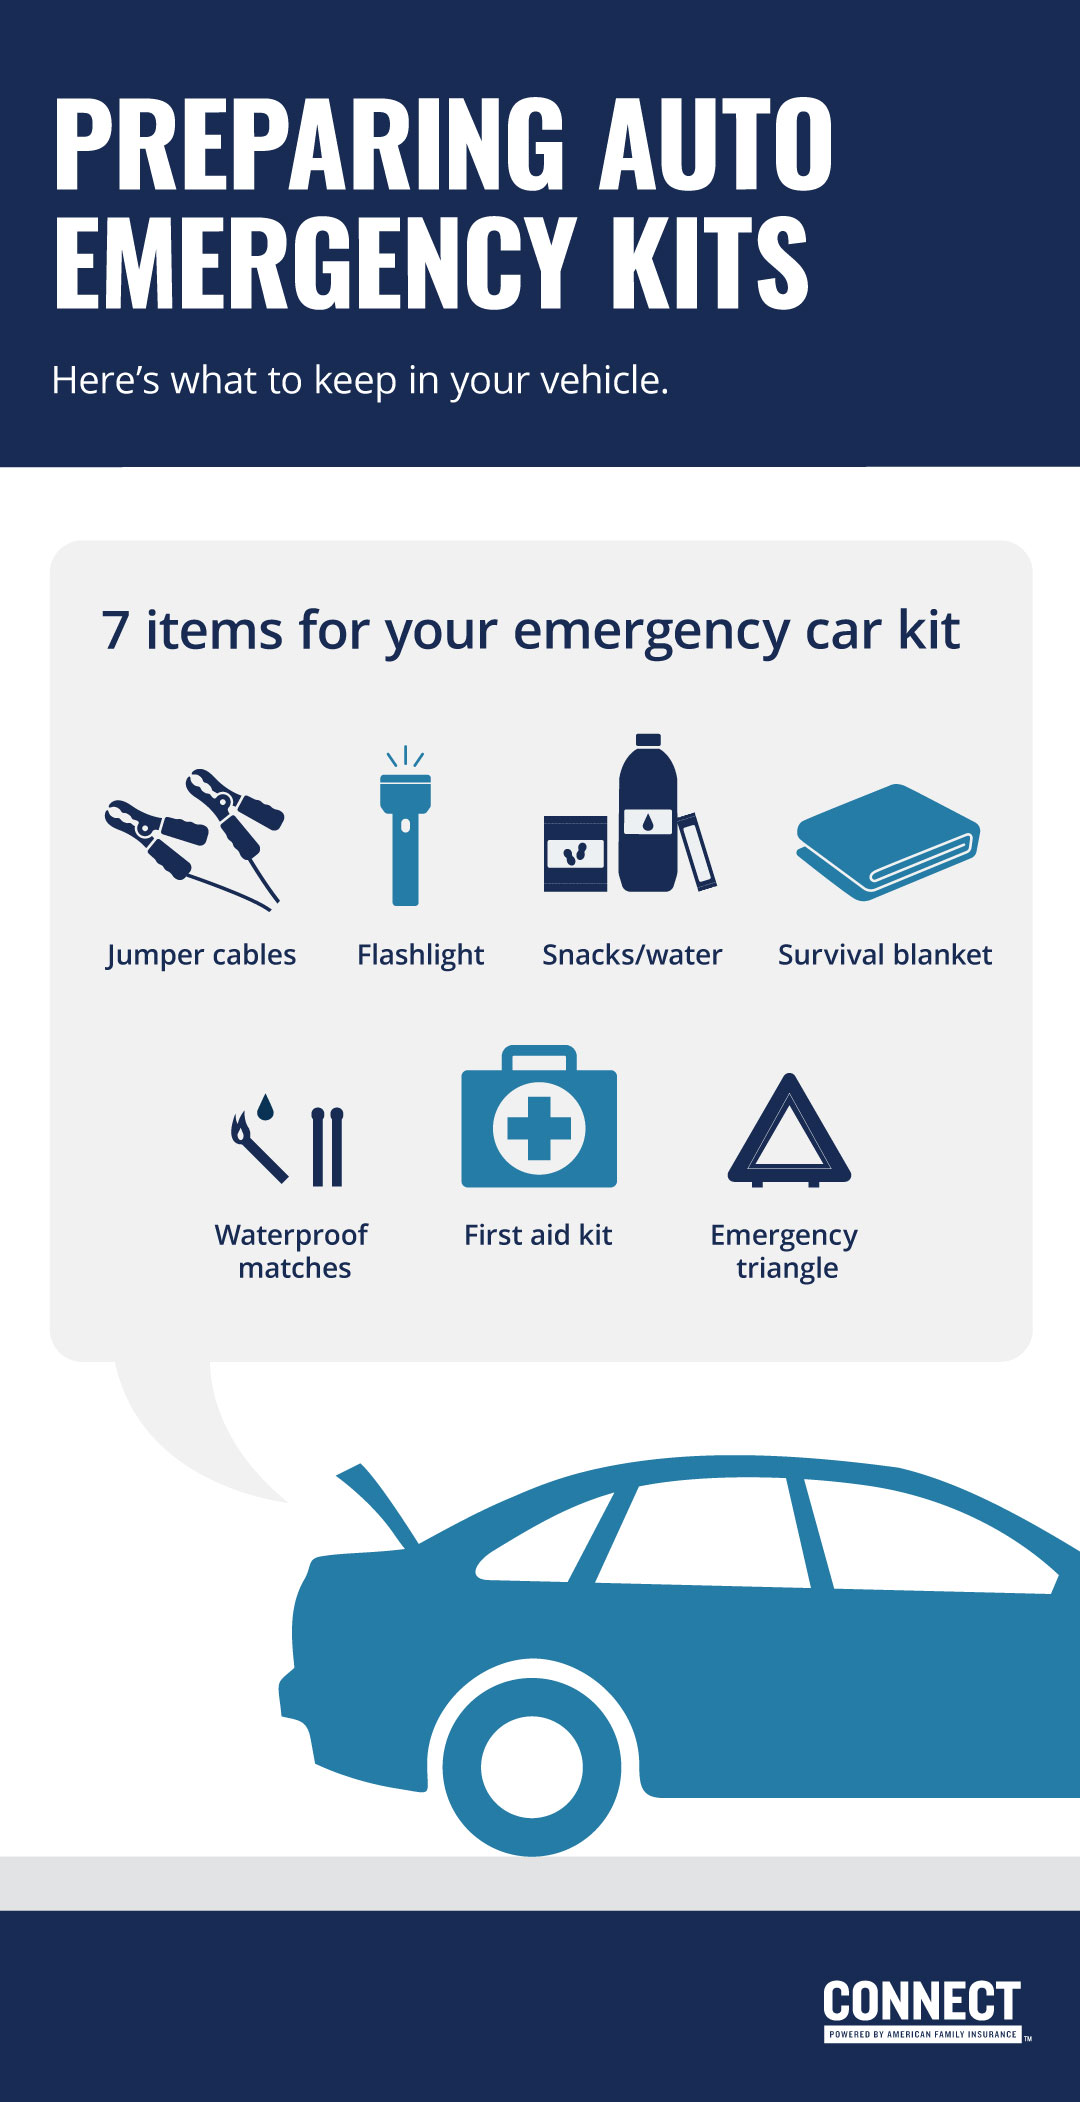 Emergency Car Kits 101: What Every Driver Needs to Know - Conclusion